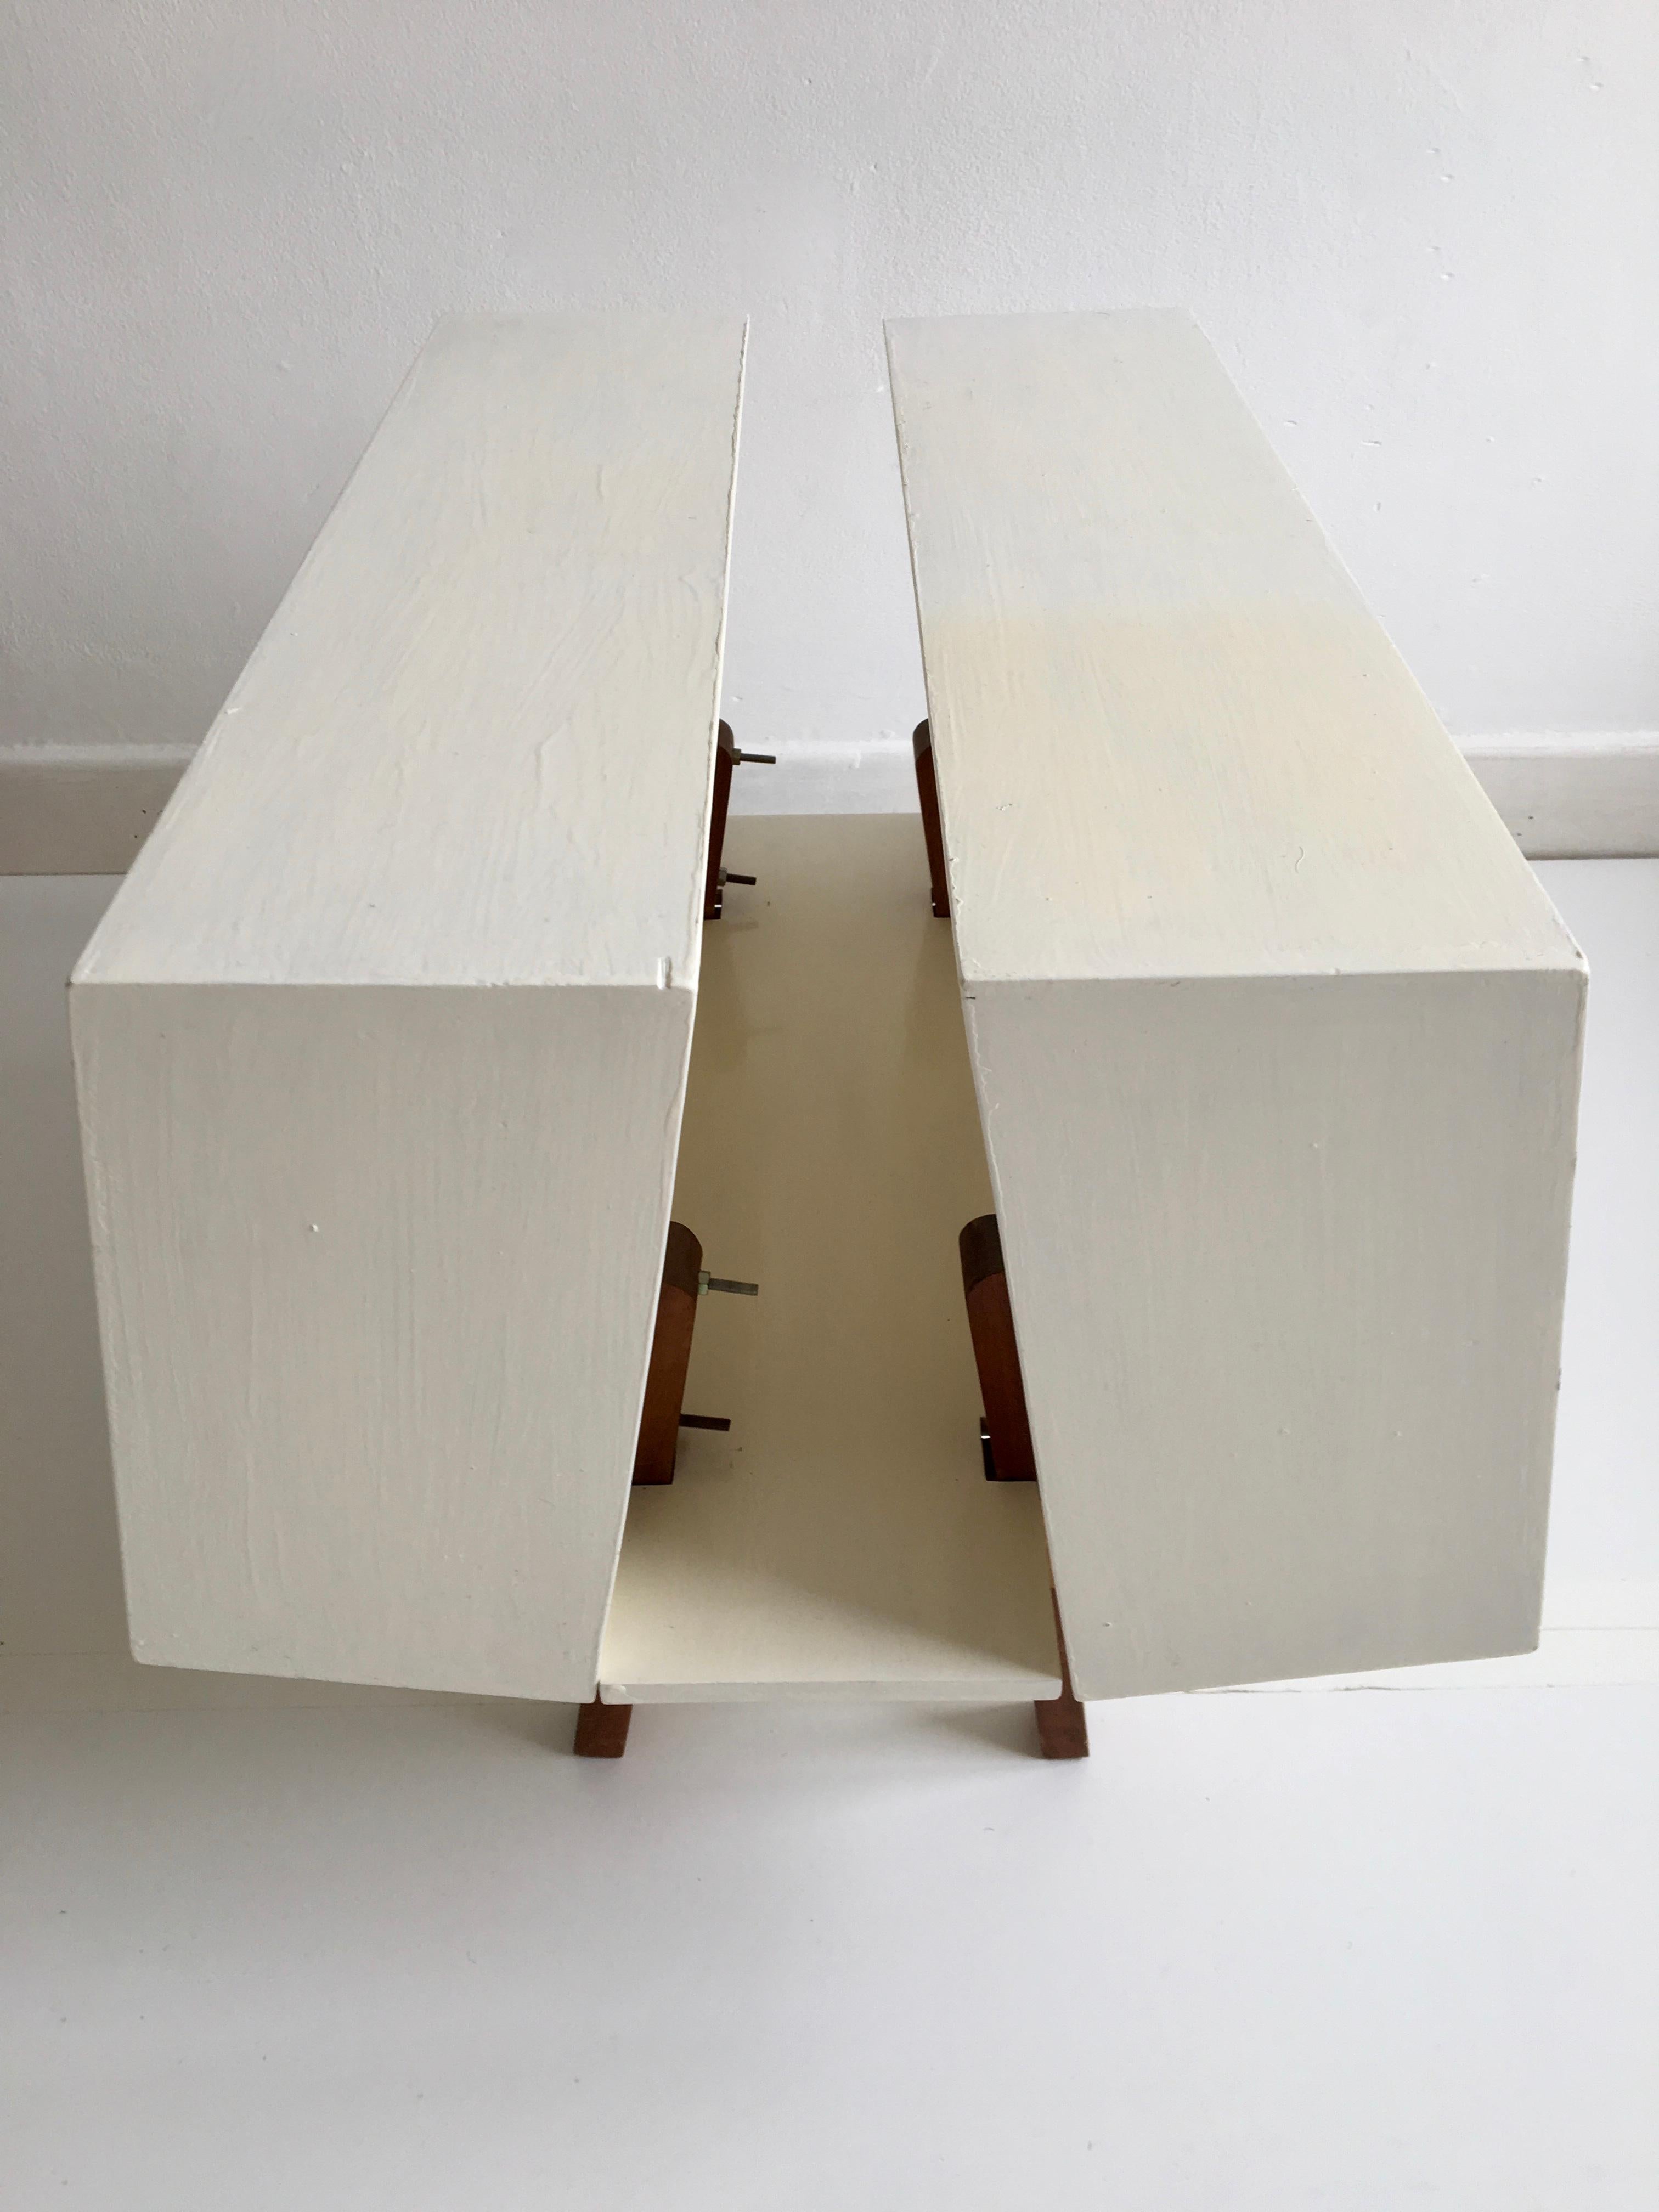 White Midcentury 'Isokon' Bookcase / Coffee Table by Ernest Race, England, 1962 For Sale 1